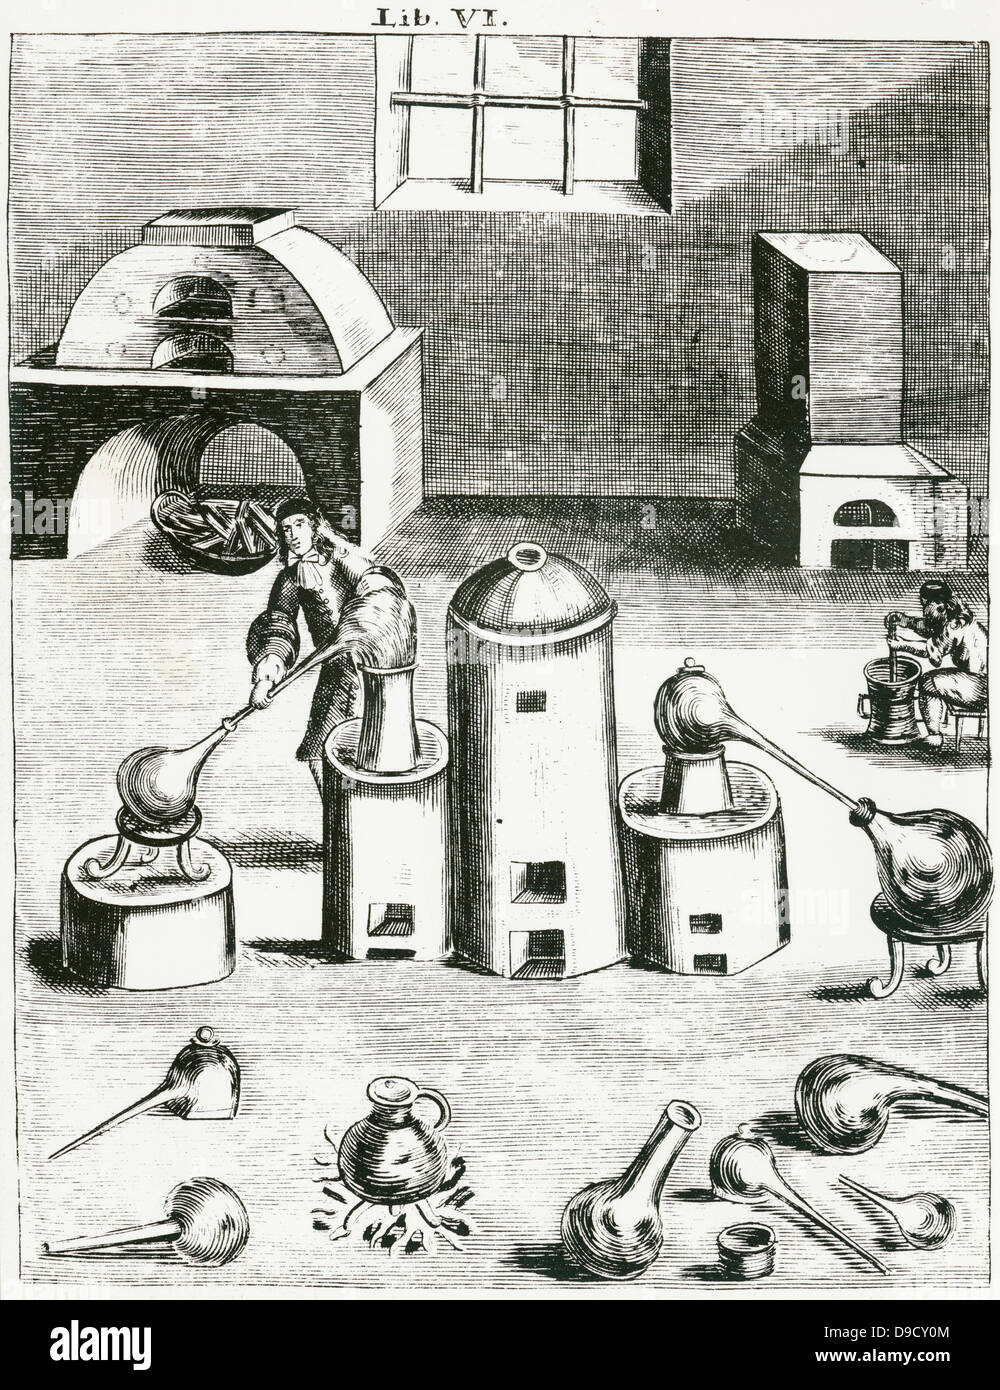 Distillation: In centre is an athanor (digesting furnace) to its right an alembic  feeds distillate into receiver.  From Magia naturalis, Nuremberg, 1715, by Johannis Baptista della Porta. First edition 1558. Stock Photo